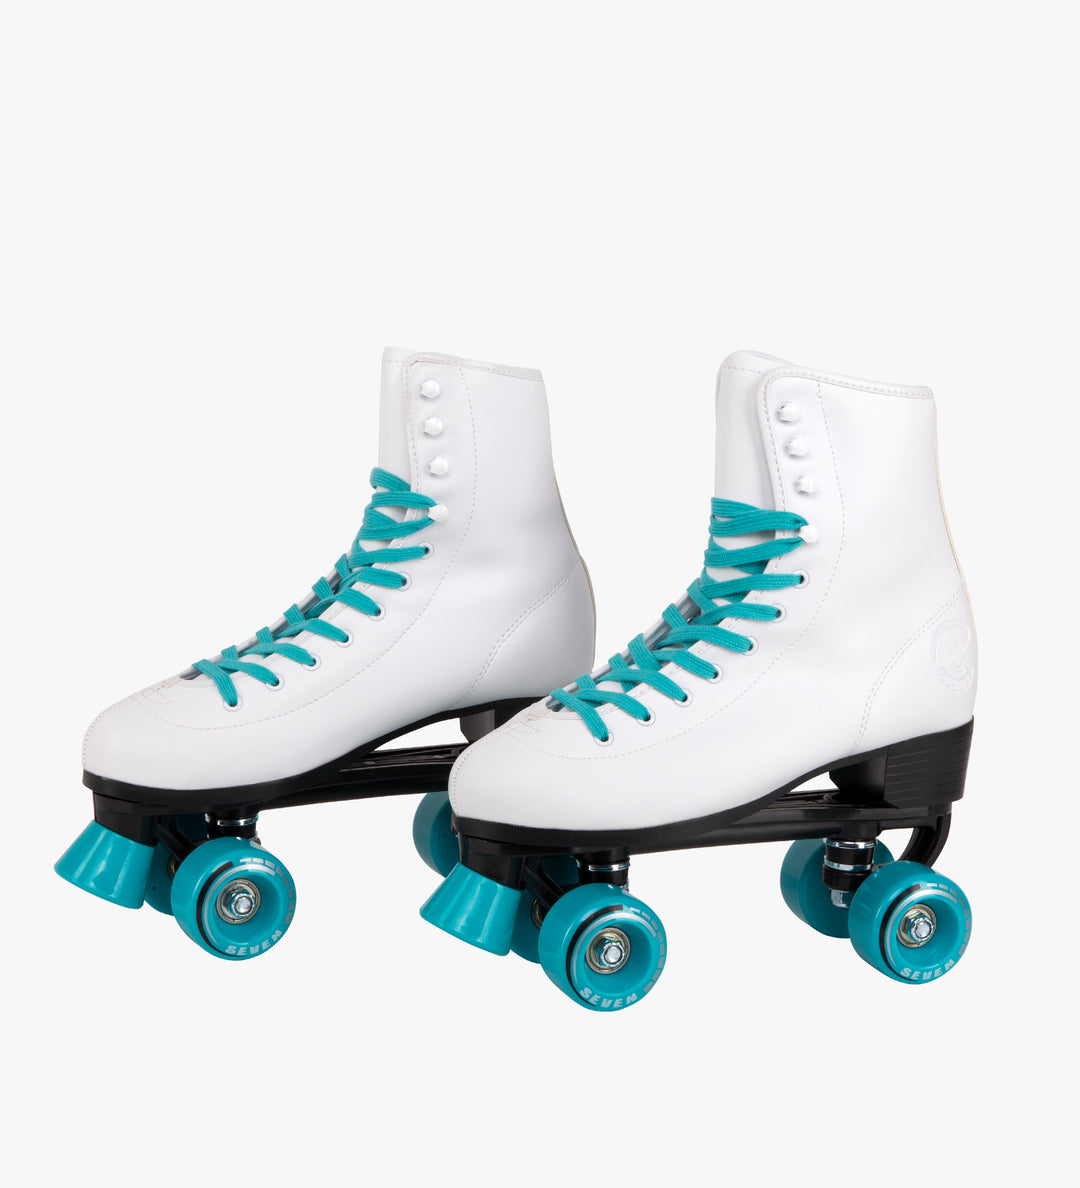 retro white quad roller skates with teal laces and wheels